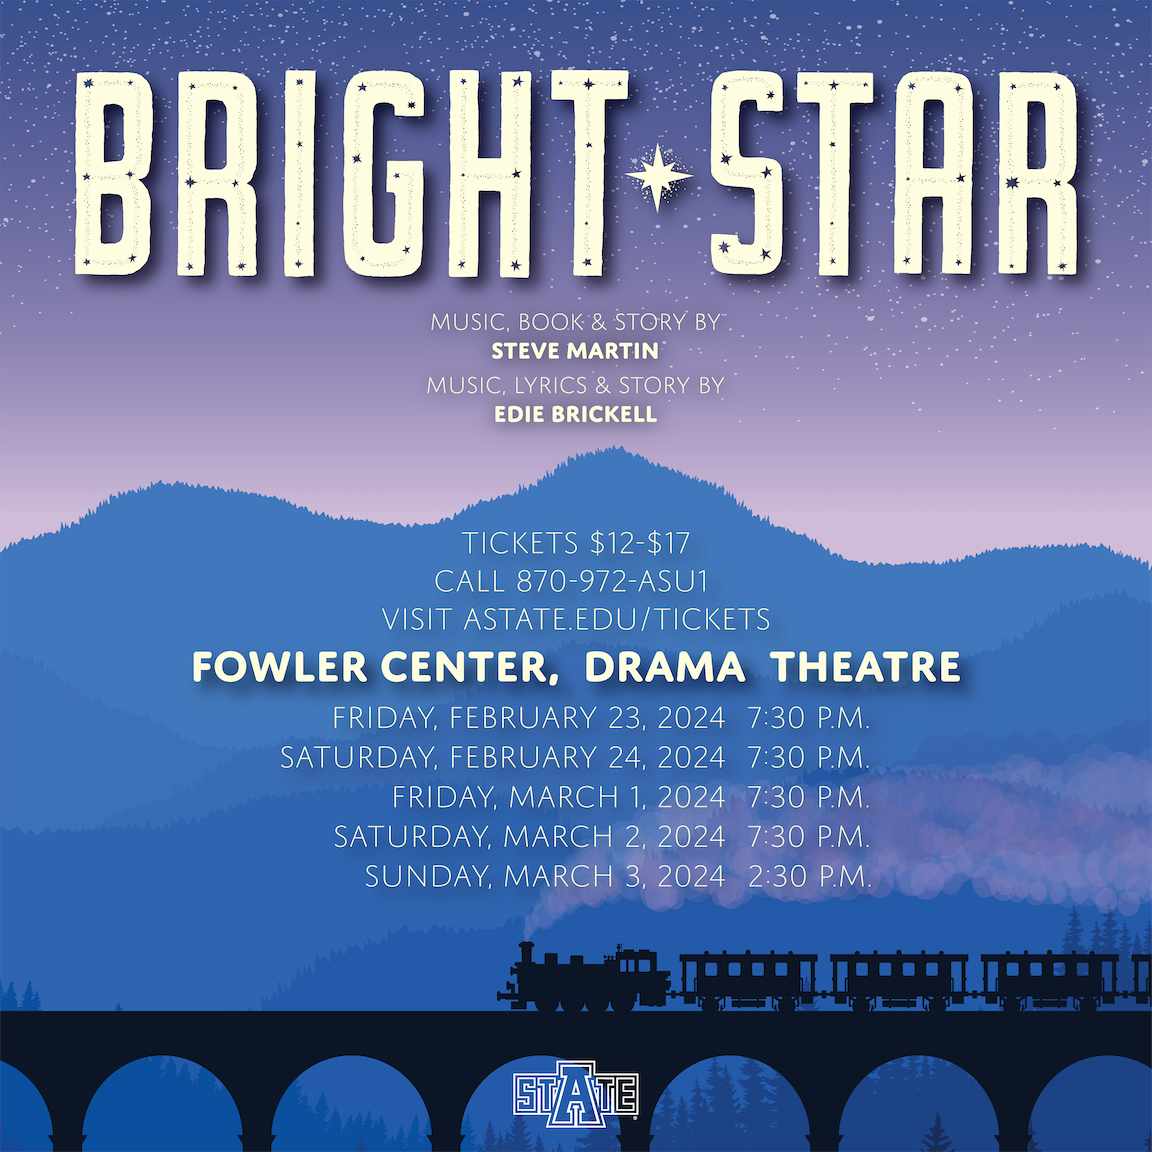 Bright Star poster featuring showtime information and the silhouette of a train on a bridge over a backdrop of blue mountains and a purple sky